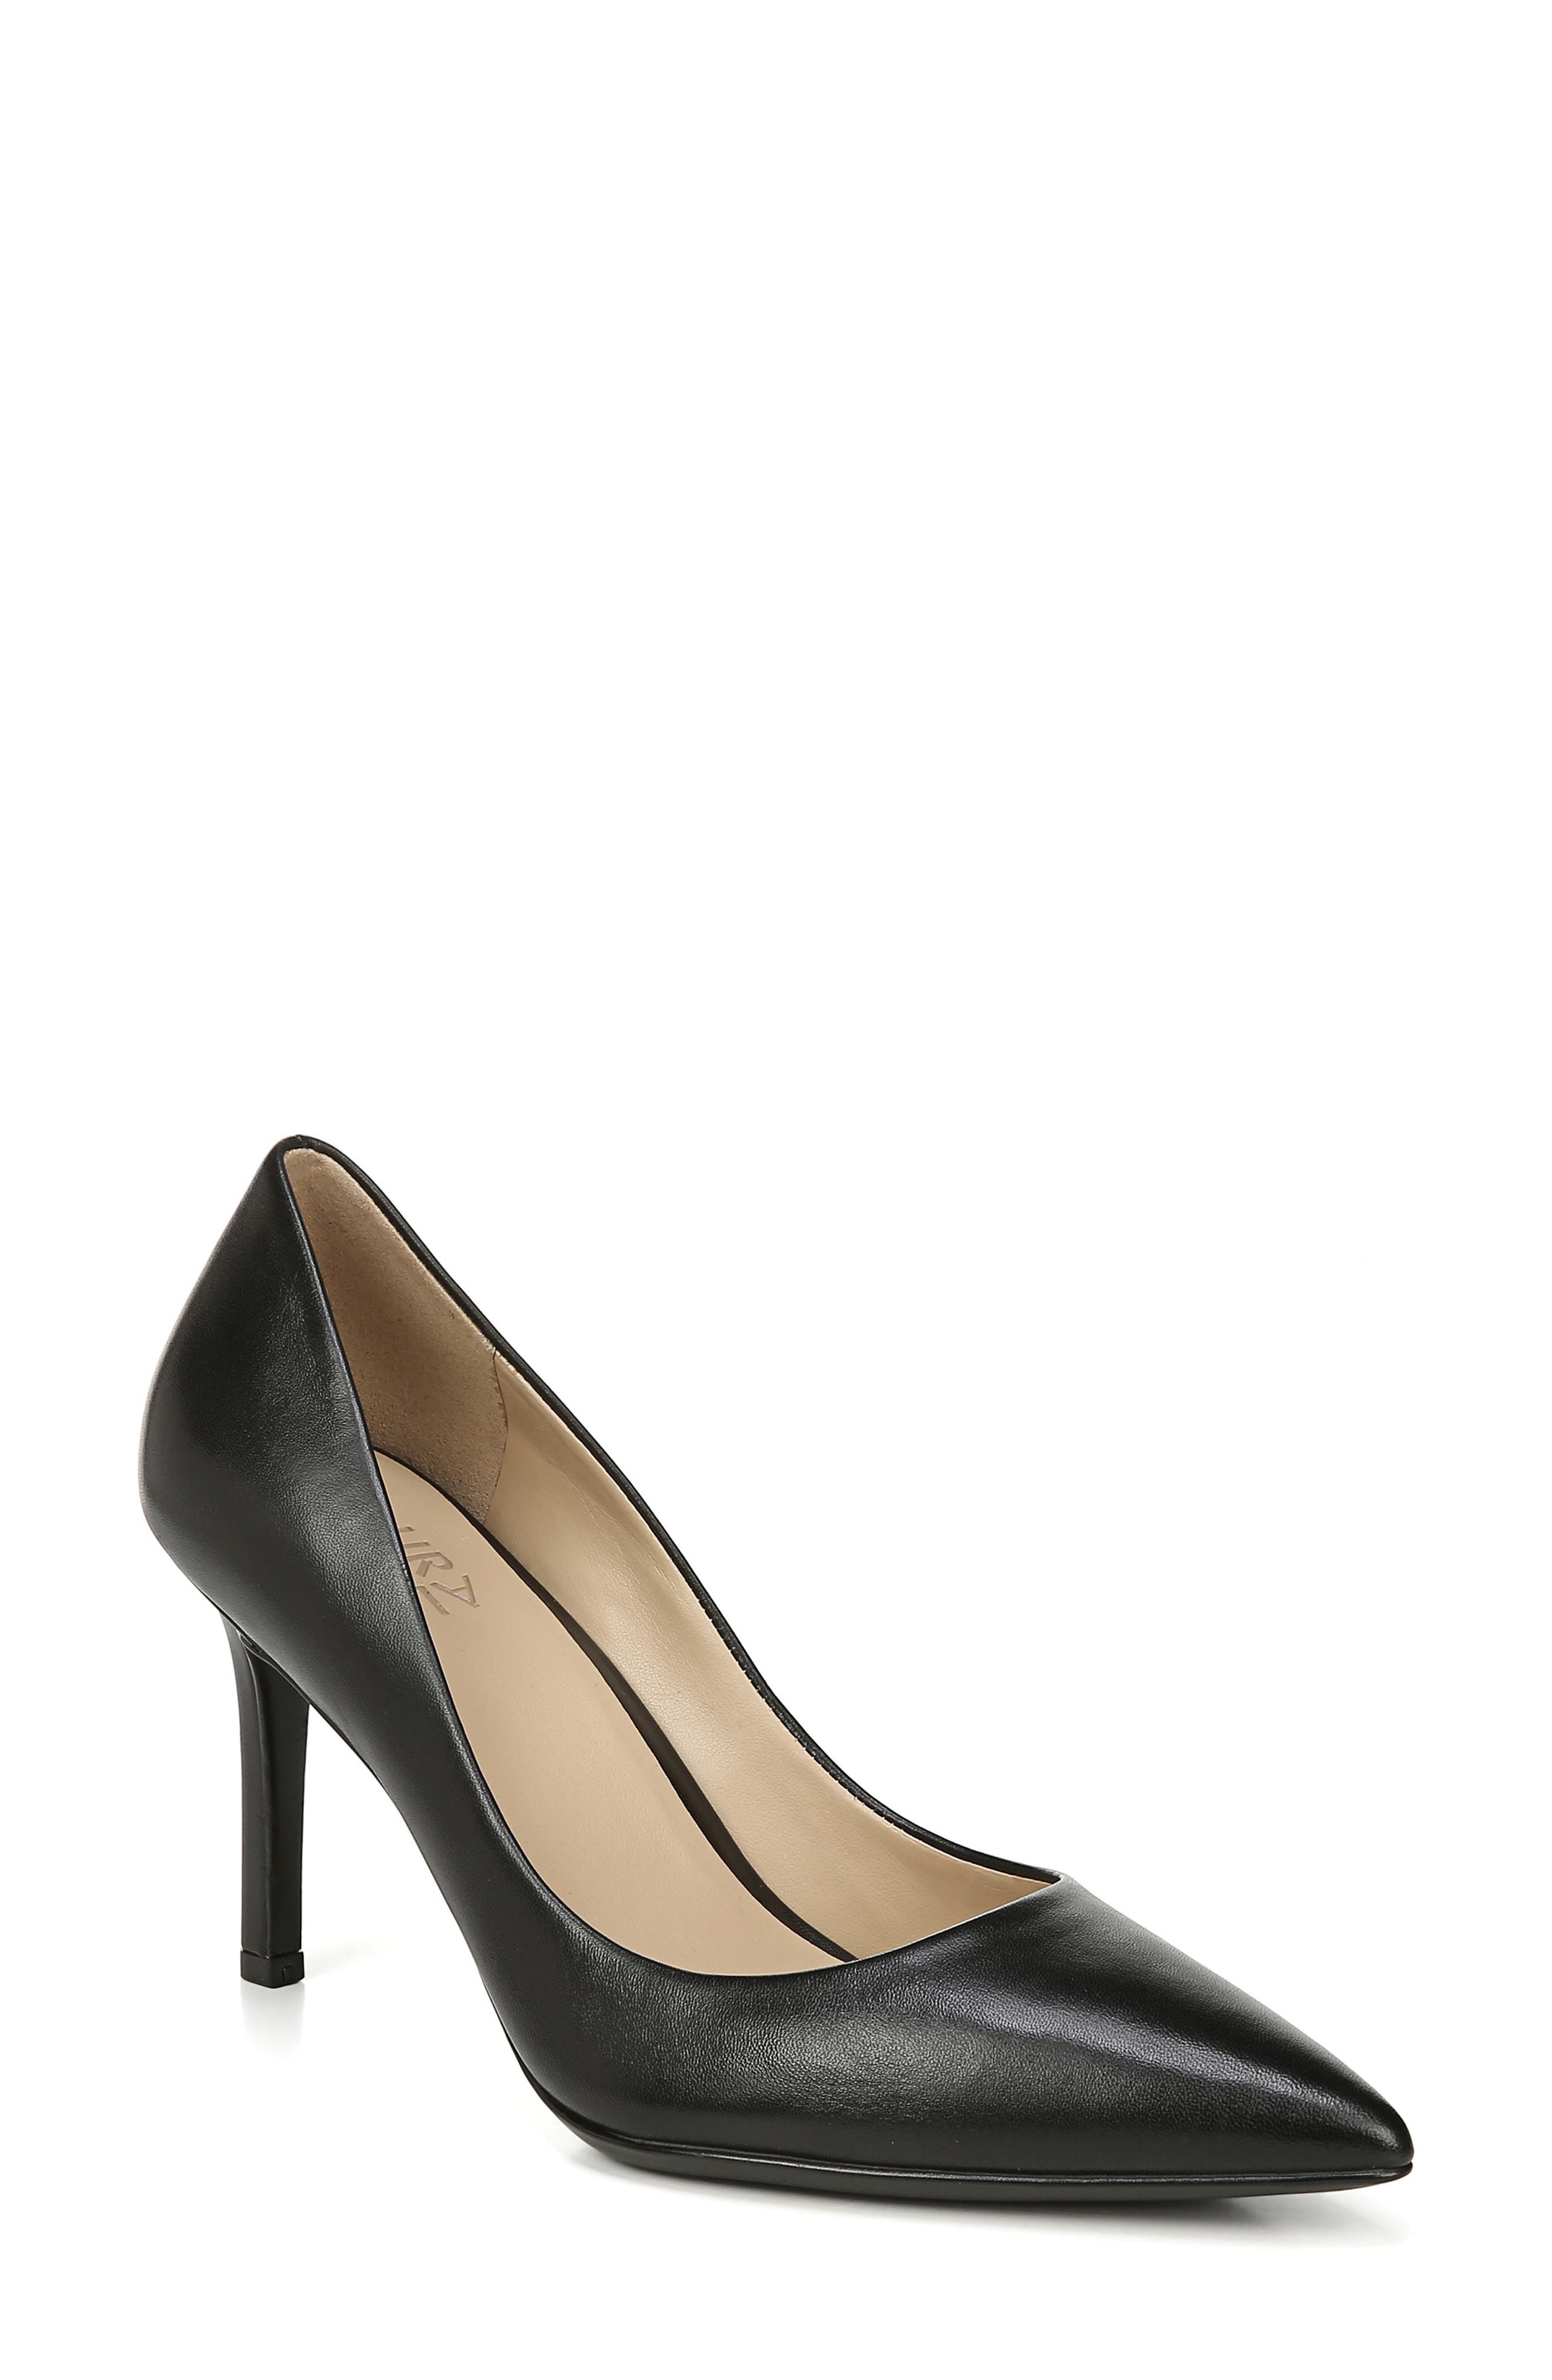 naturalizer pointed toe pump